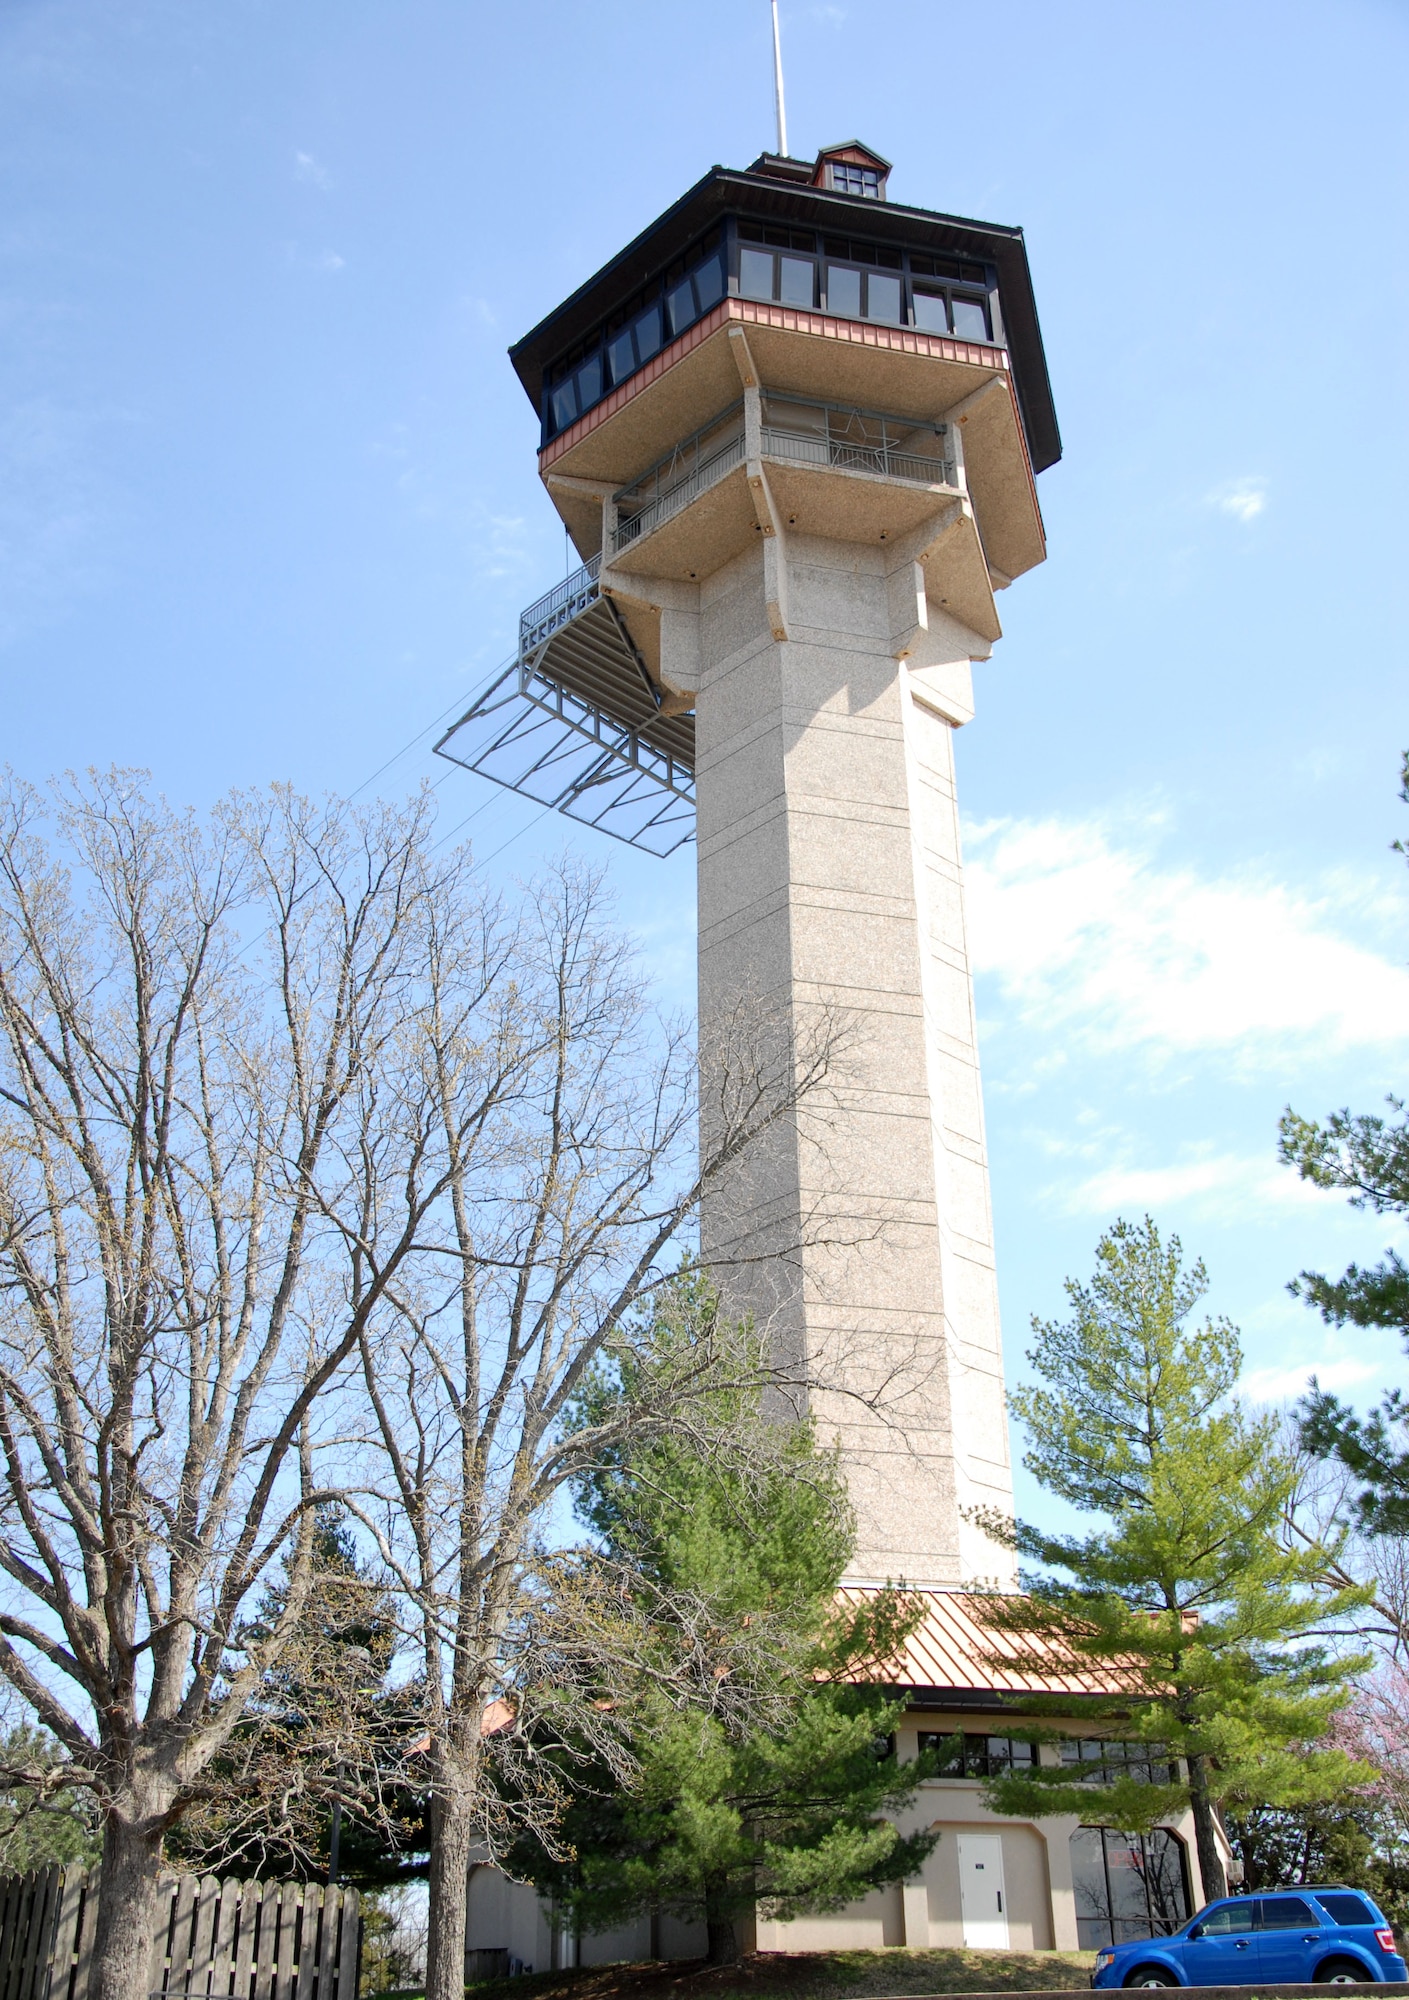 The Inspiration Tower located at Shepherd of the Hills is 230 ft. and weighs 3 million pounds. On a clear day, one can see over 90 miles. (U.S. Air Force photo by Senior Airman Regina Agoha)